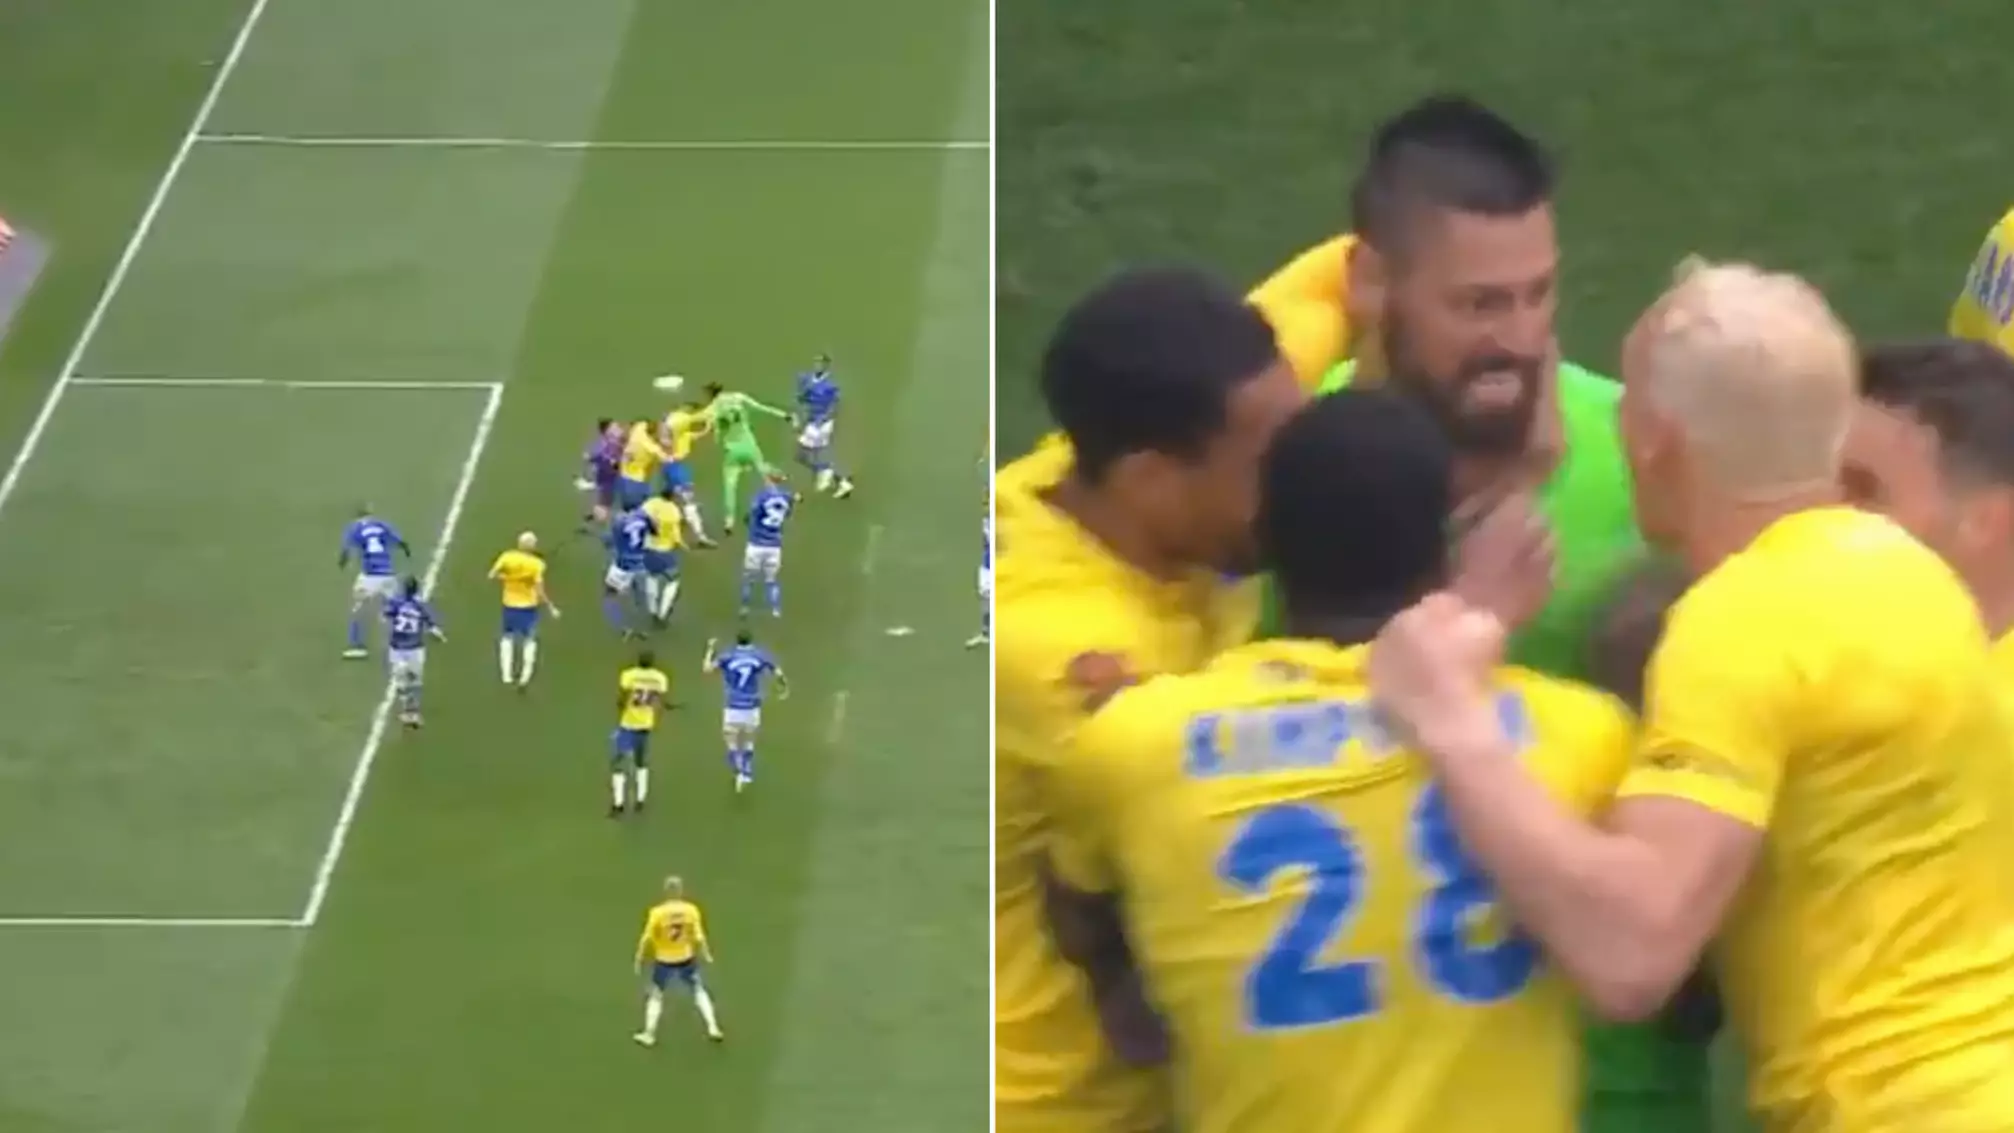 Incredible Scenes As Torquay Goalkeeper Scores 95th Minute Equaliser In Play-Off Final